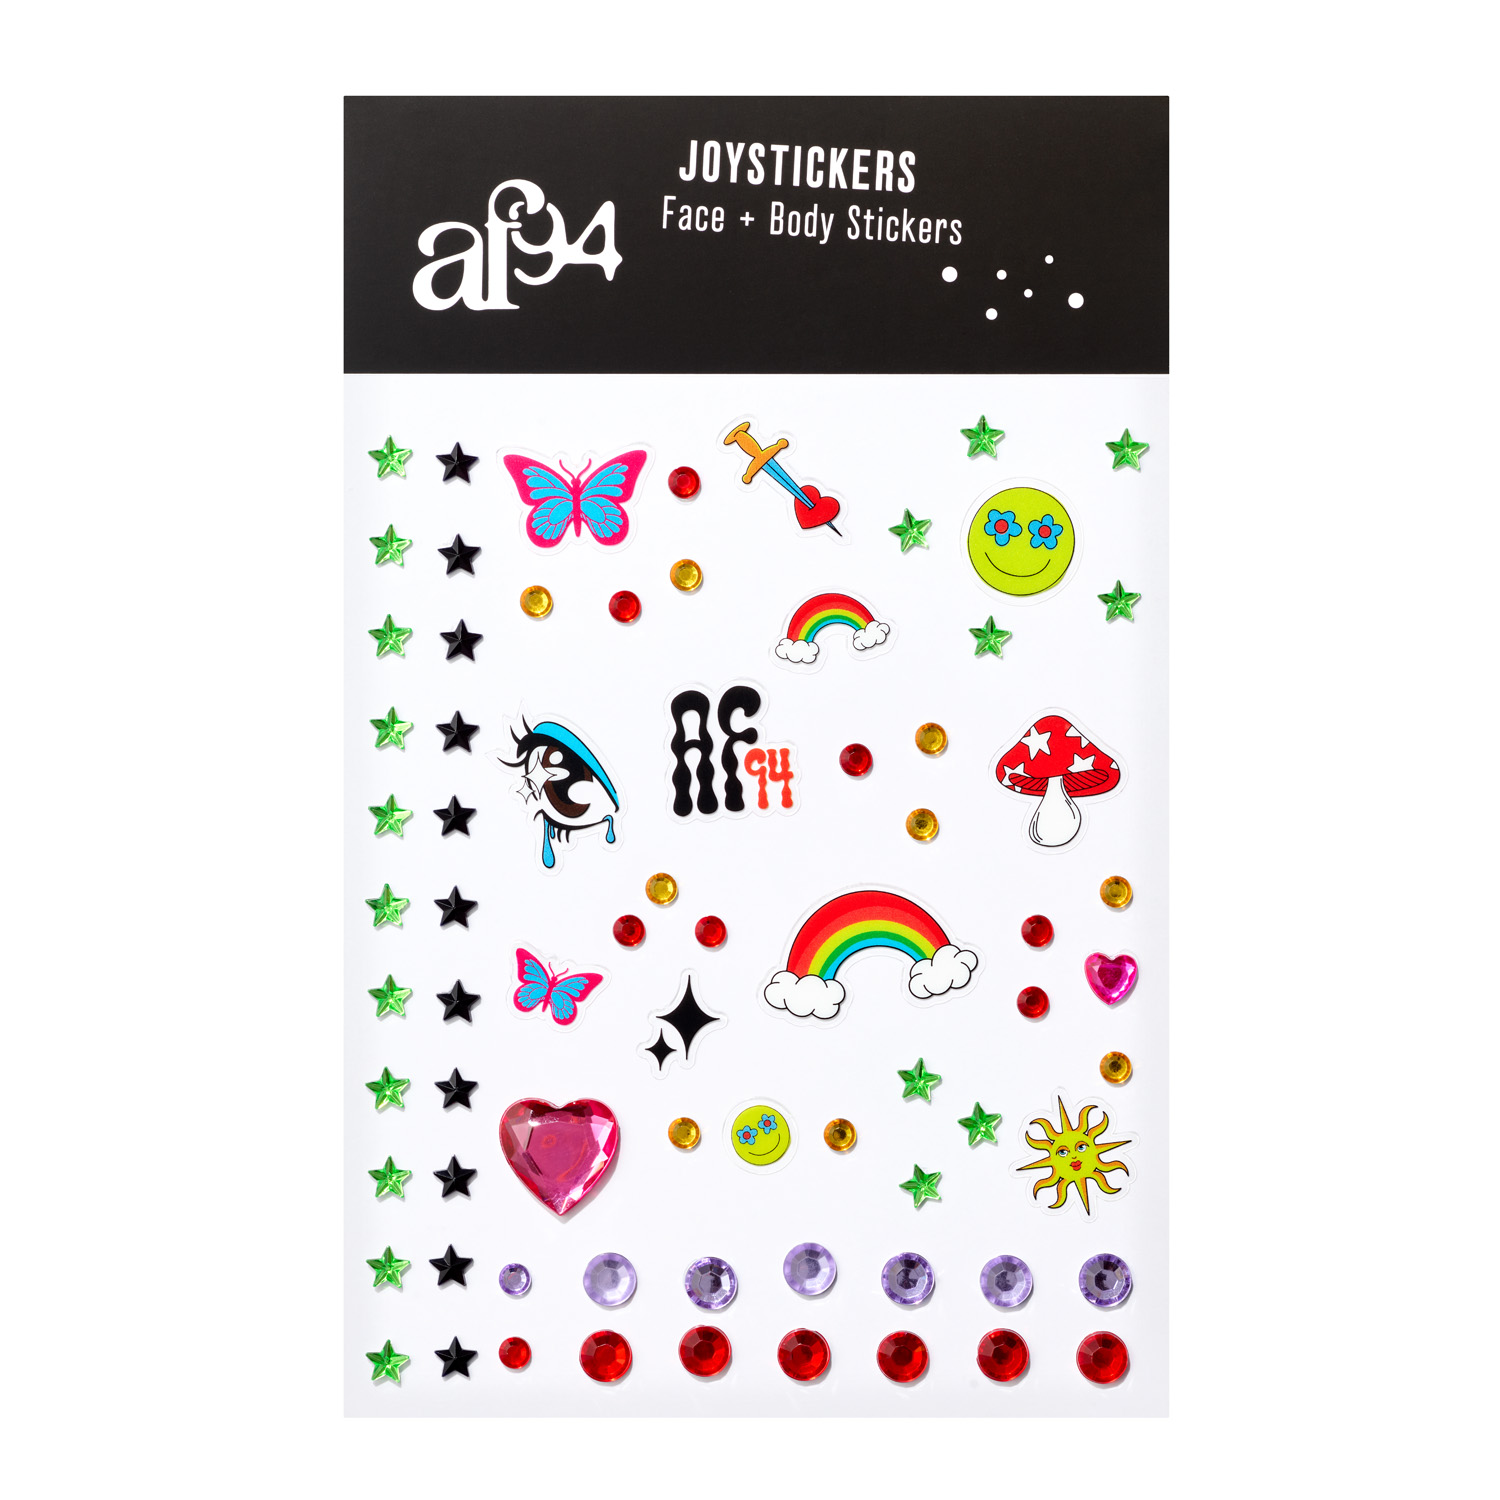 af94 Joystickers Face Stickers - image 1 of 2